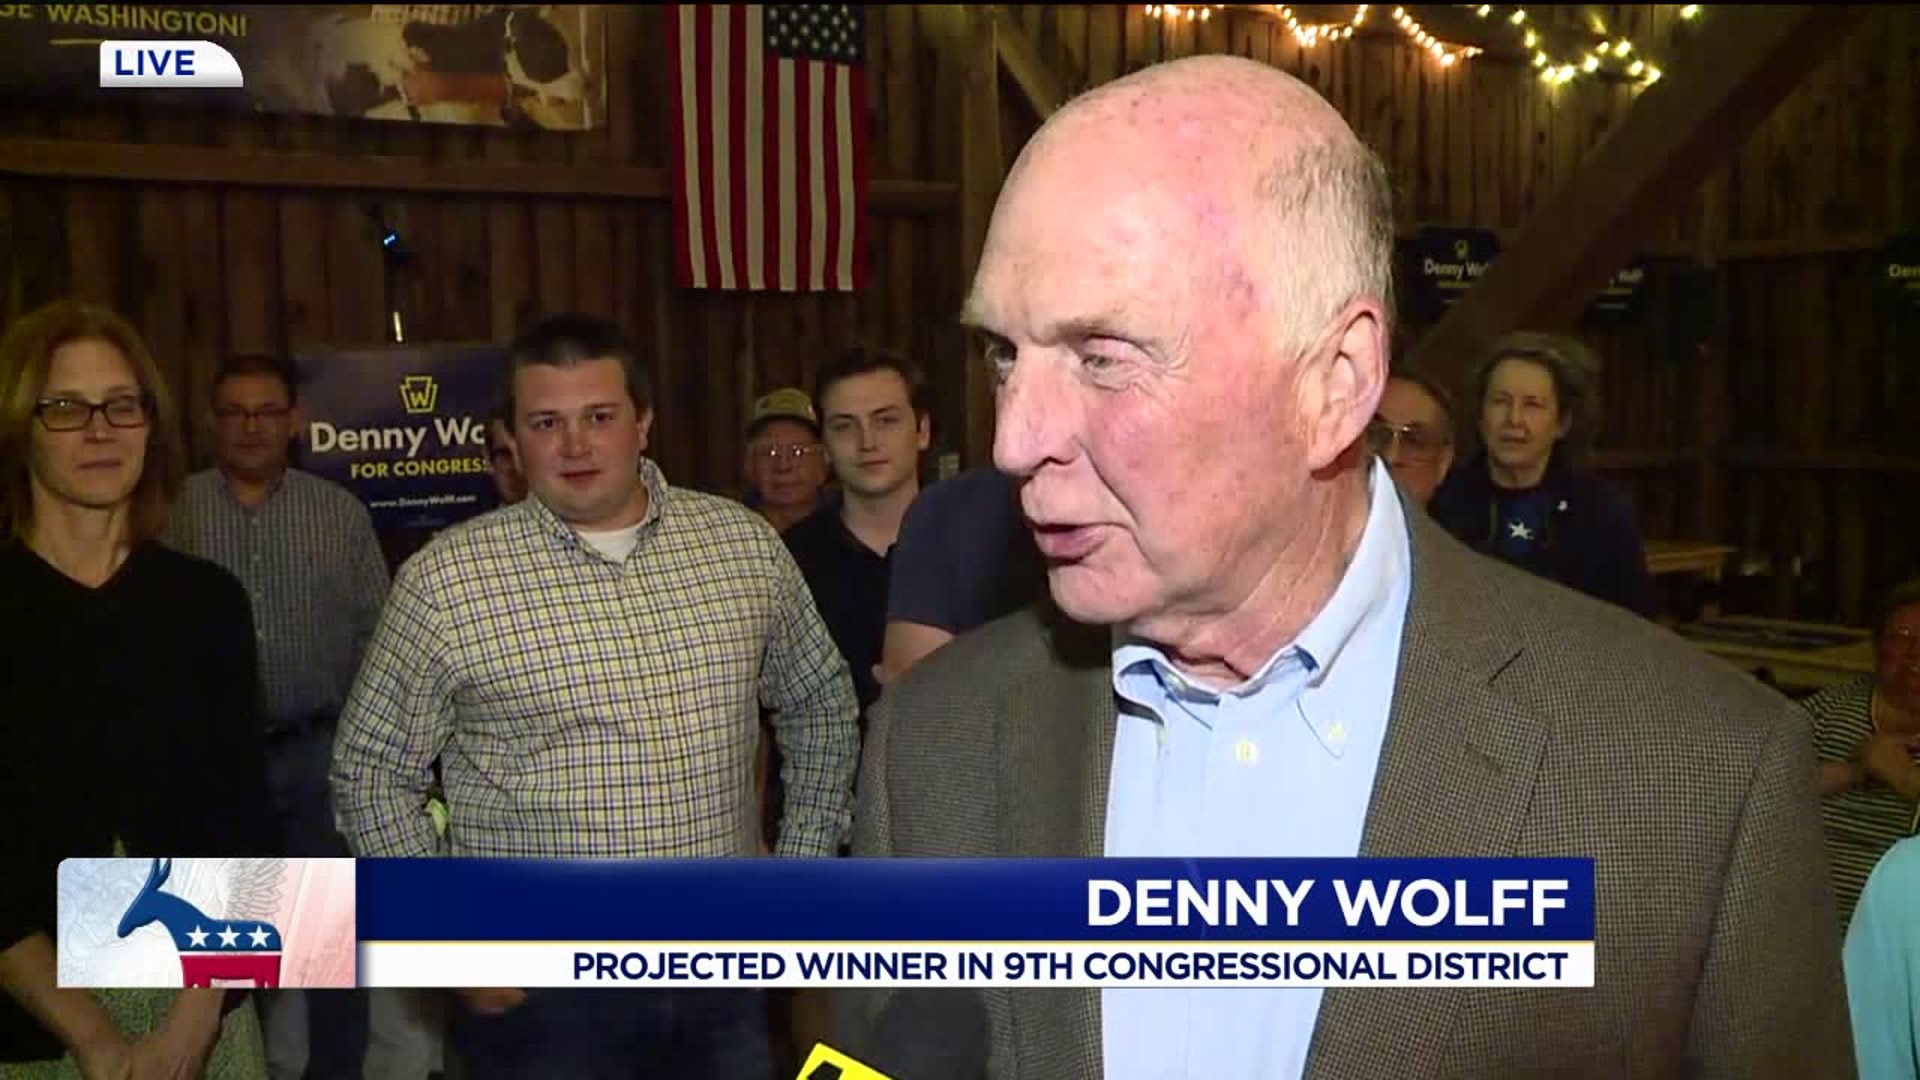 Denny Wolff Wins Democratic Nomination for U.S. House in 9th District